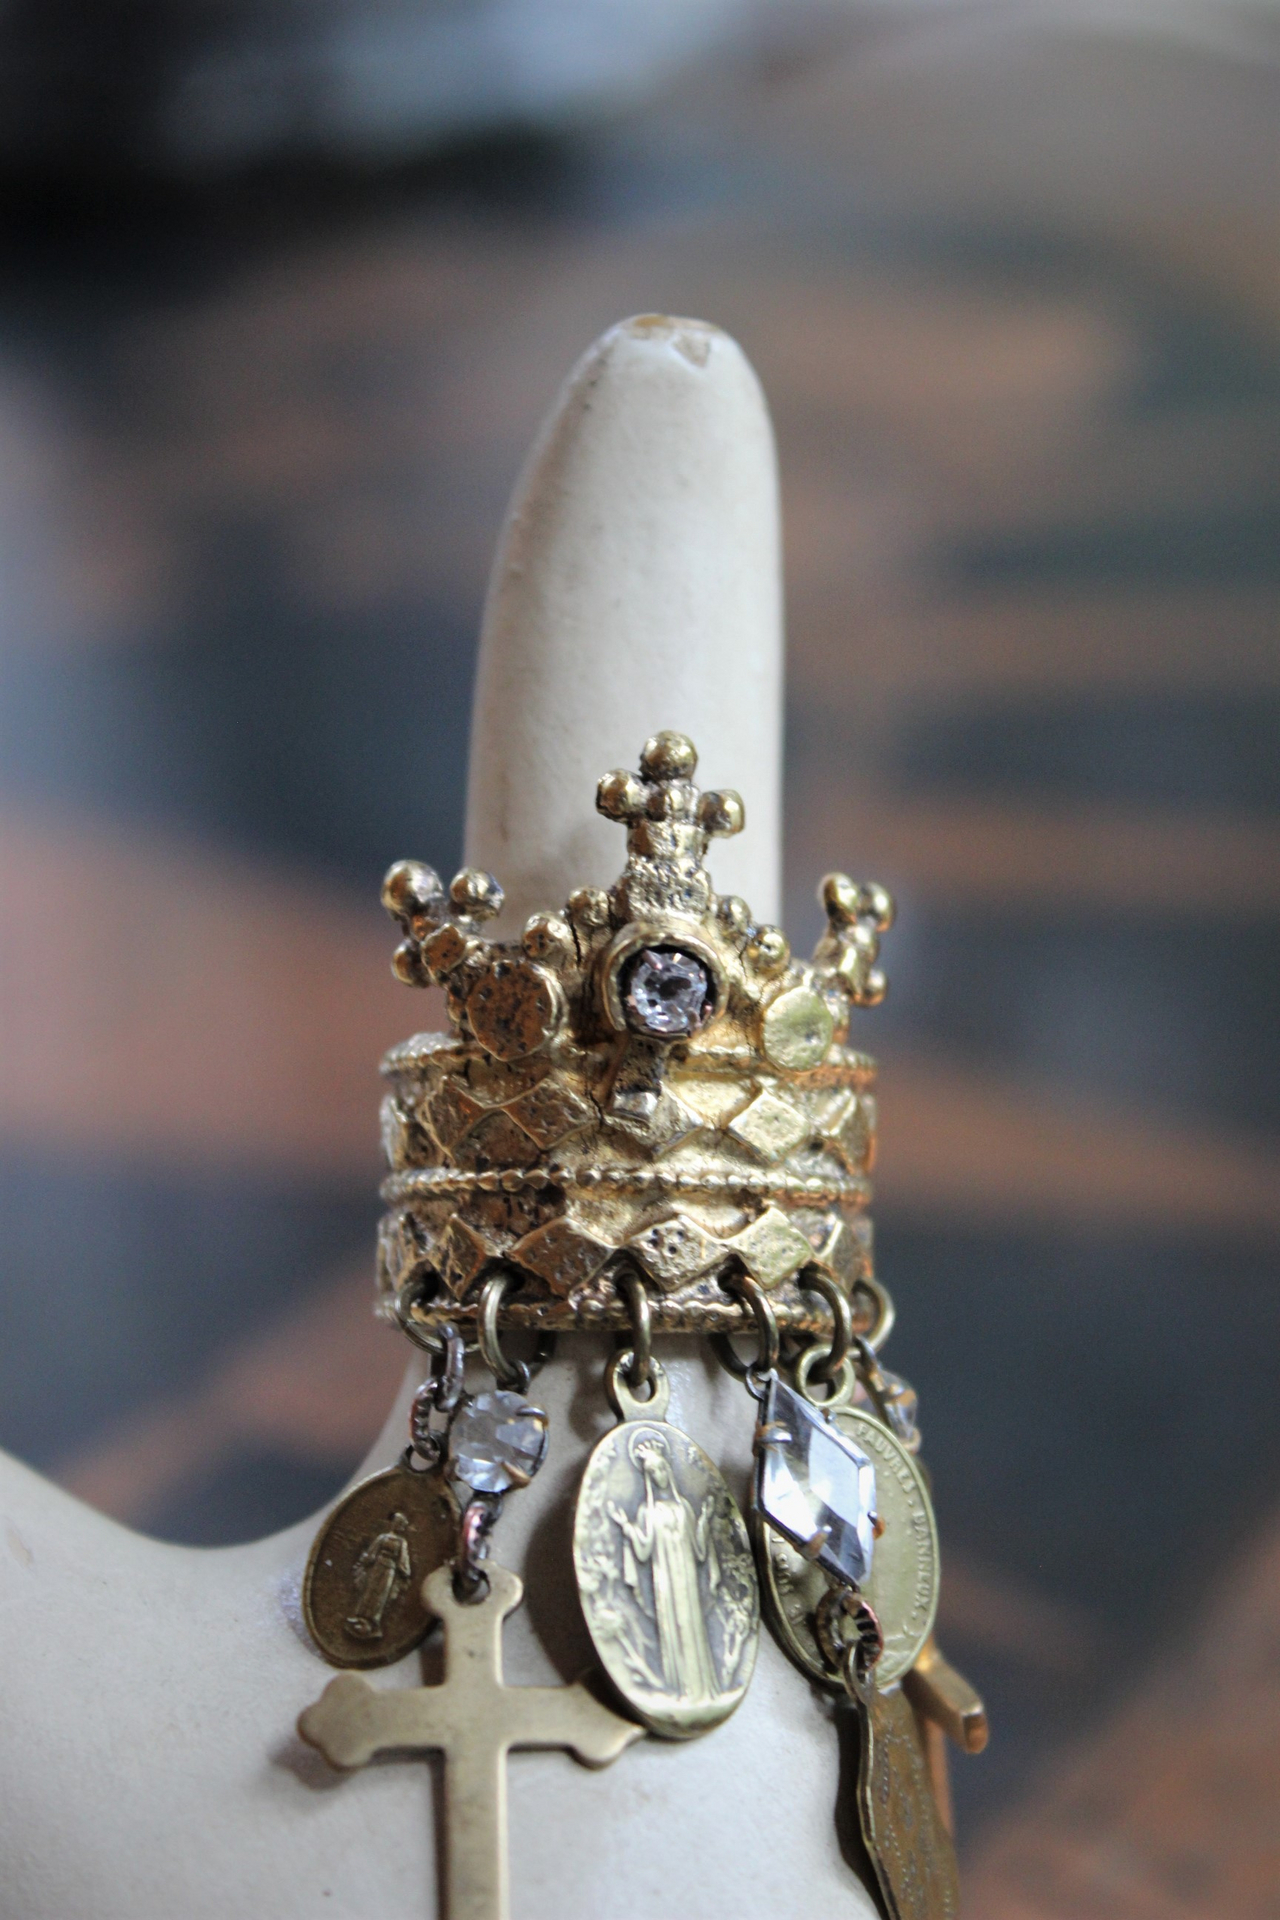 Antique Gilt Crown Ring with Antique French Medals, Antique Crosses, Antique Faceted Rock Crystals - Size 9 